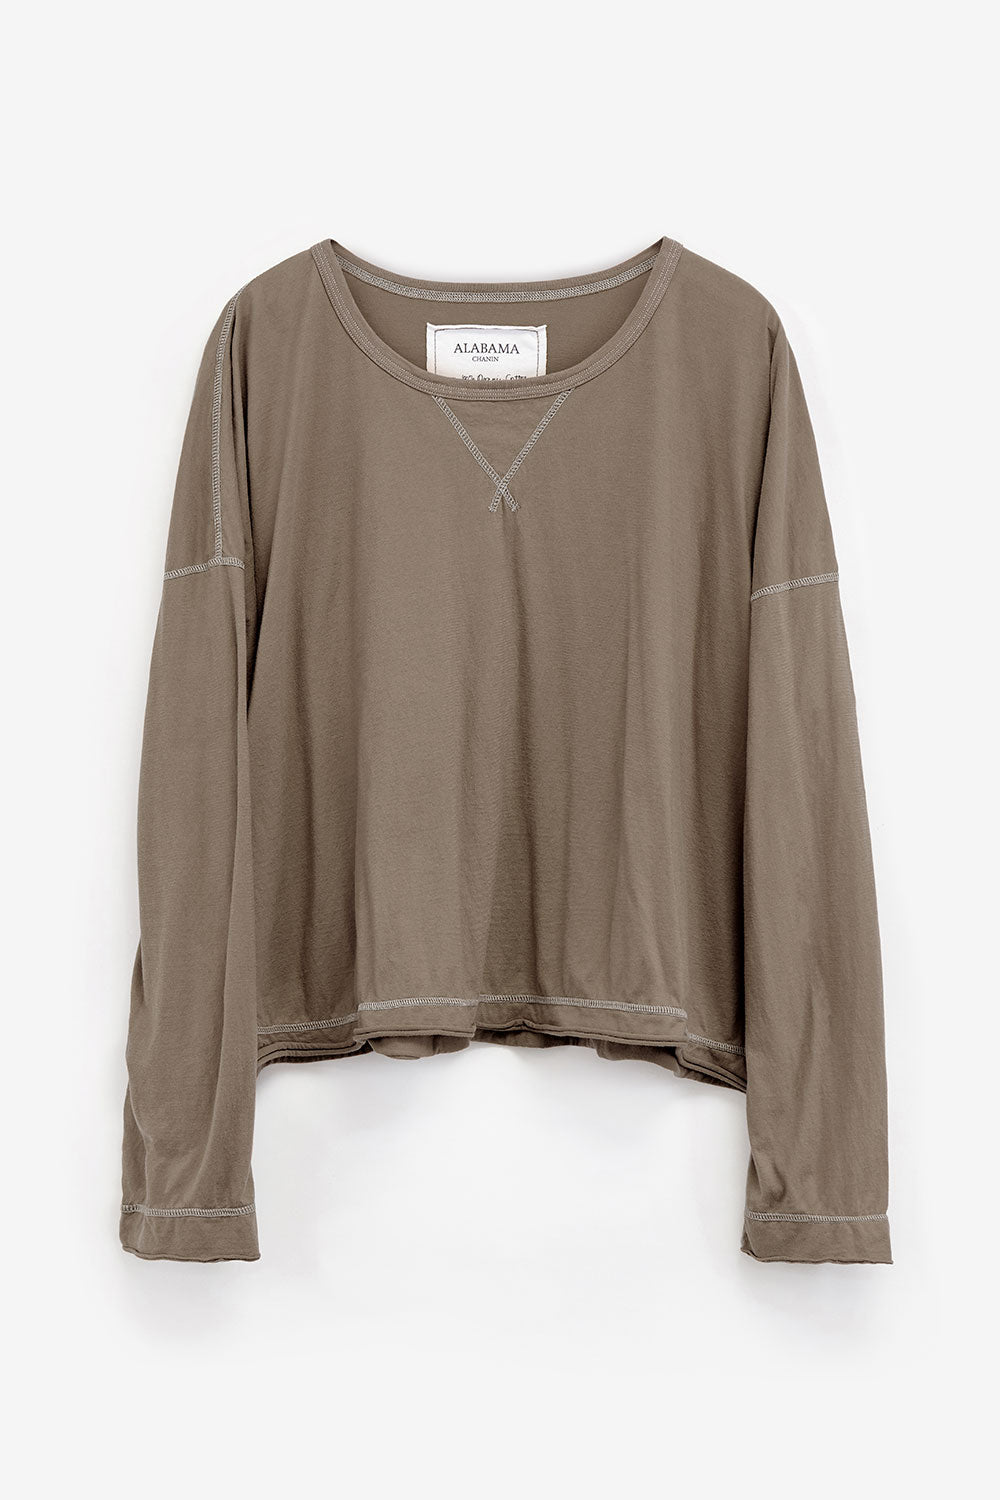 Alabama Chanin Coverup with long sleeves, shown in Concrete color.